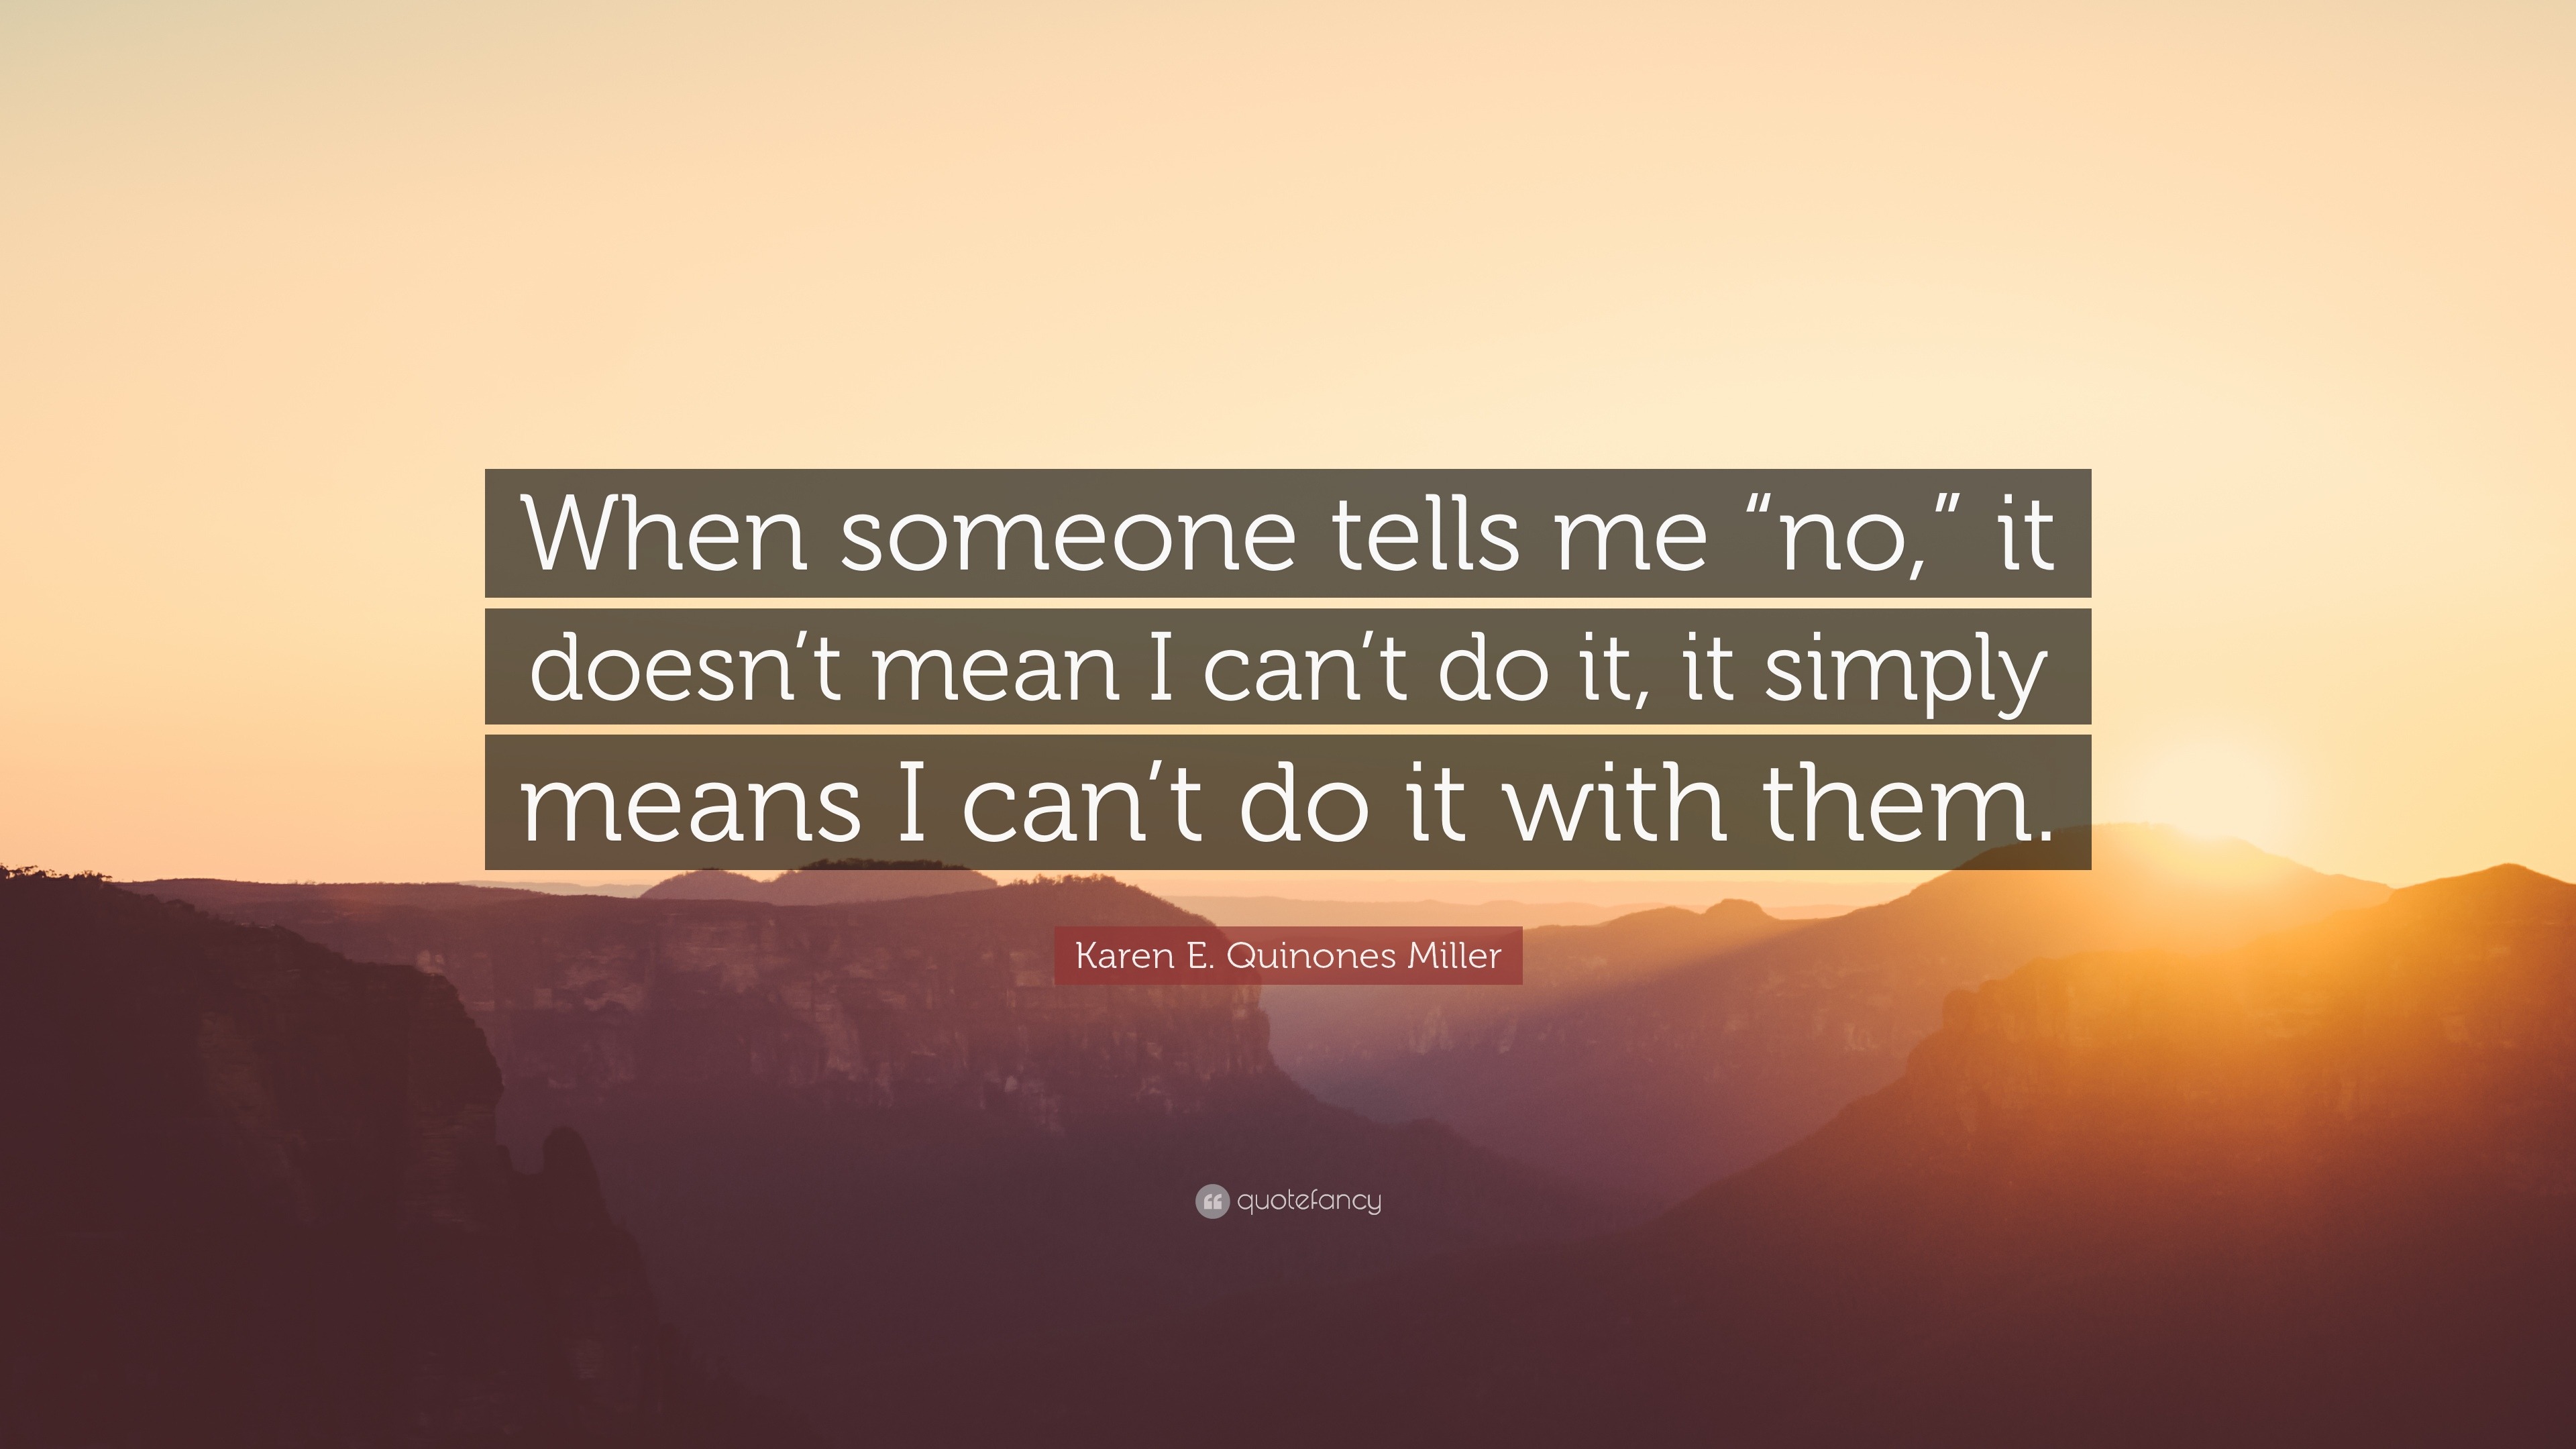 Karen E. Quinones Miller Quote: “When someone tells me “no,” it doesn’t